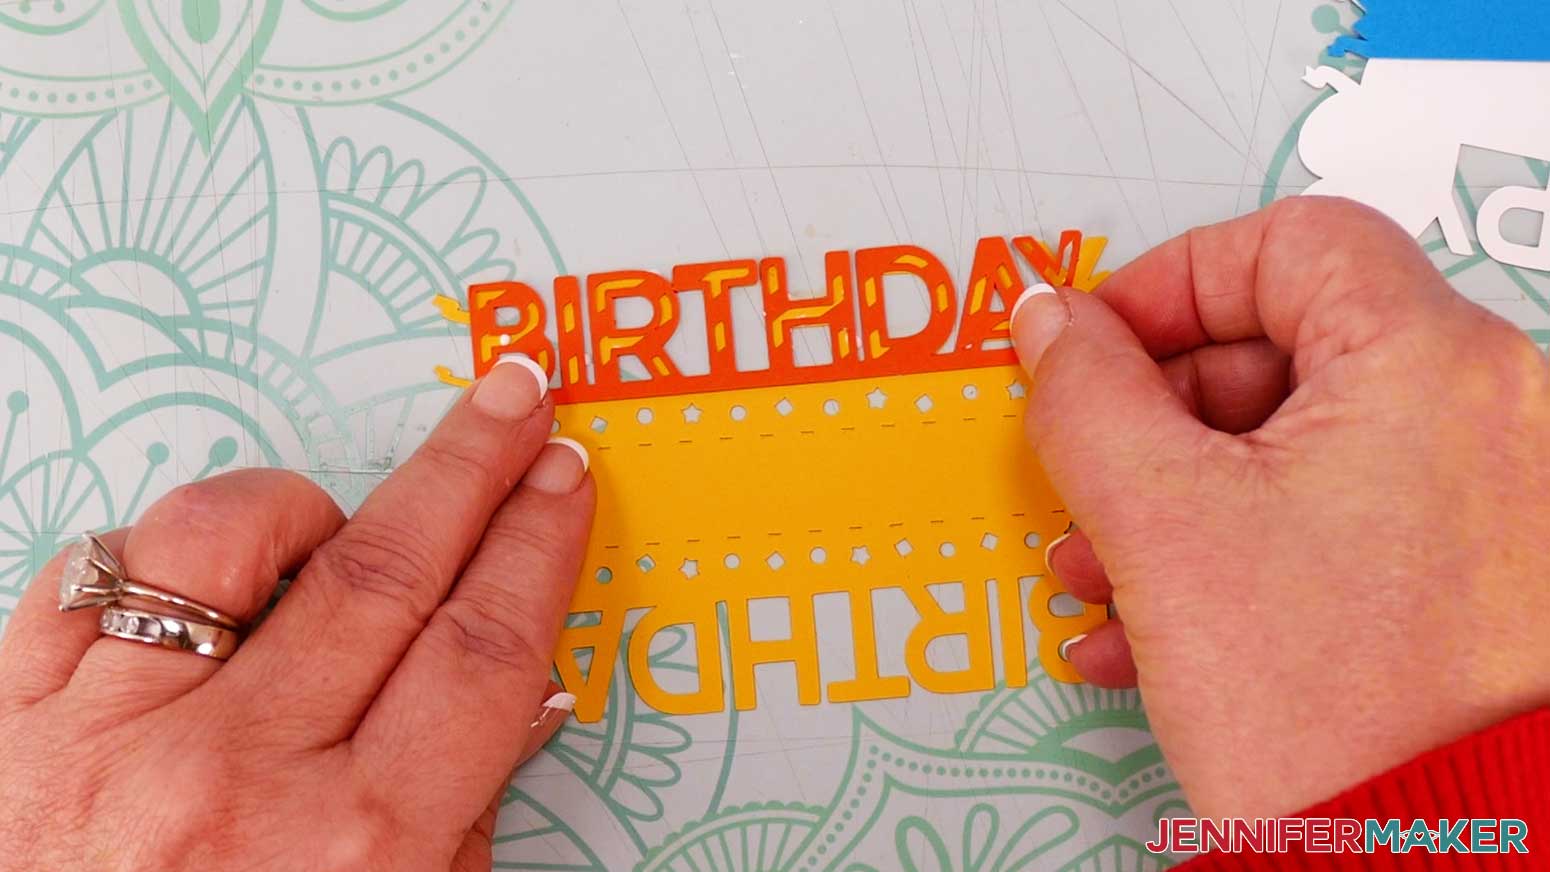 Glue the orange "birthday" piece on top of the yellow "birthday" base to make the cardboard jumping box "happy birthday" sentiment